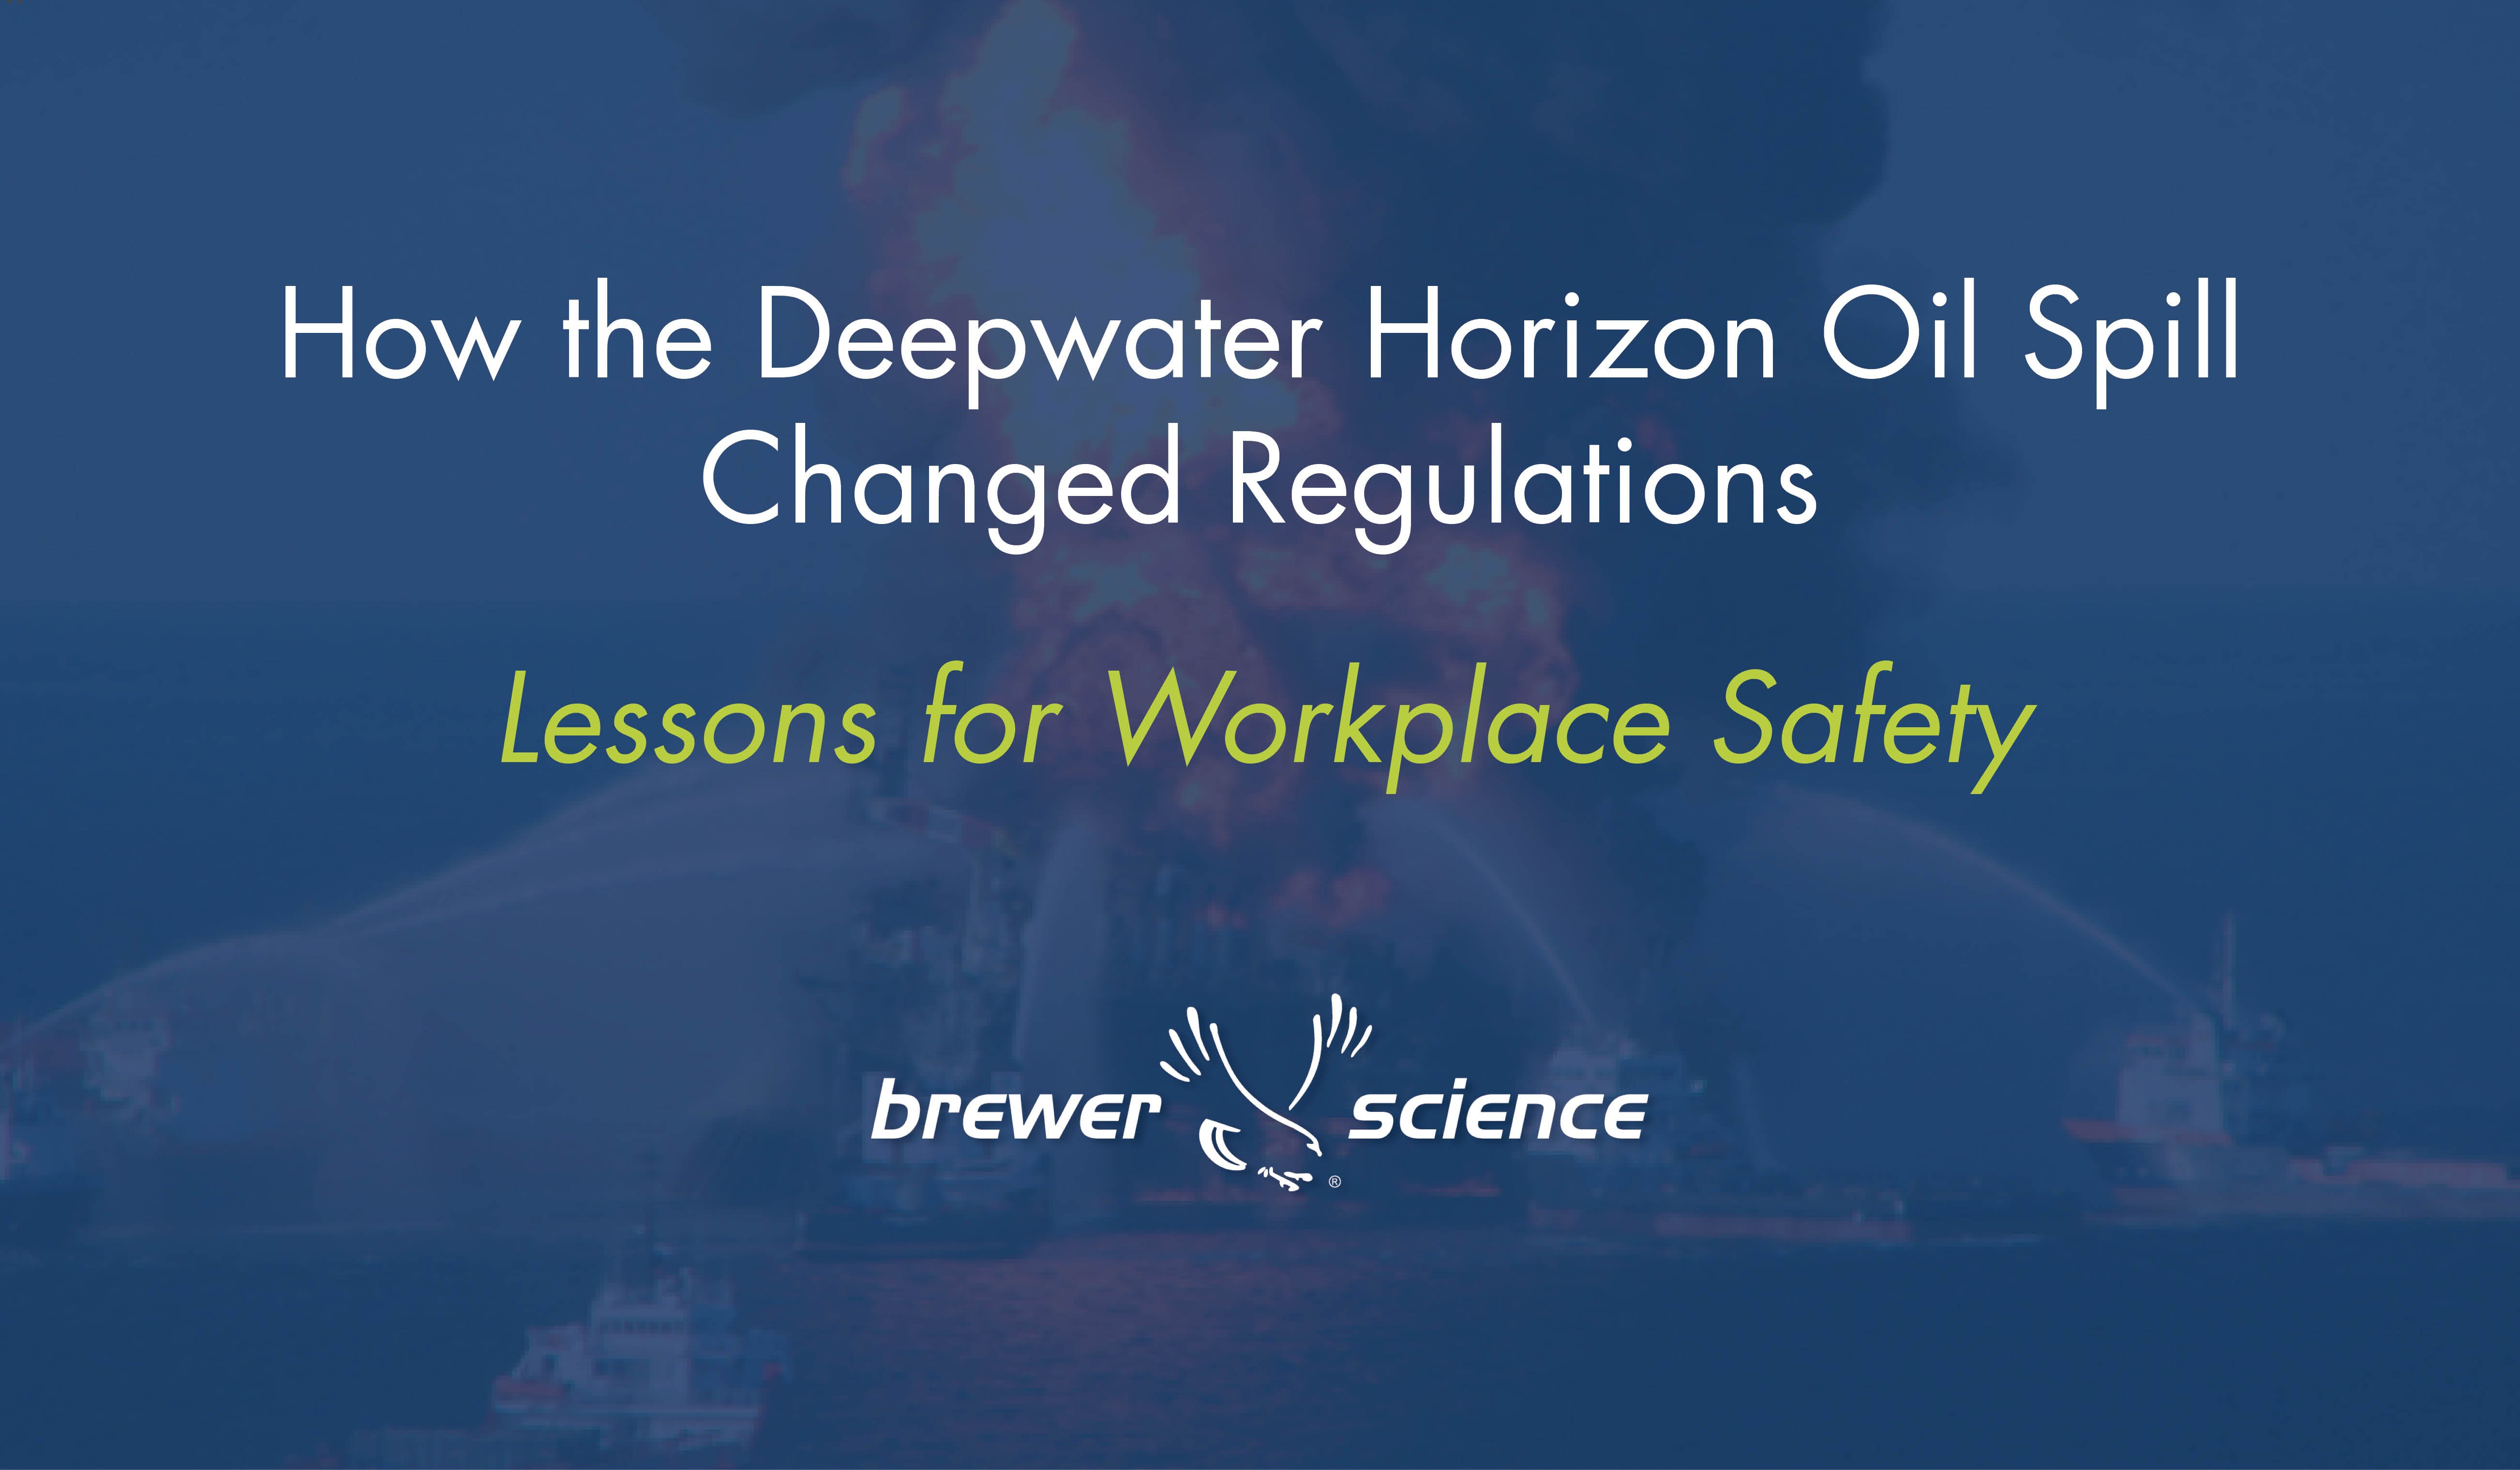 How the Deepwater Horizon Oil Spill Changed Regulations - Lessons for Workplace Safety